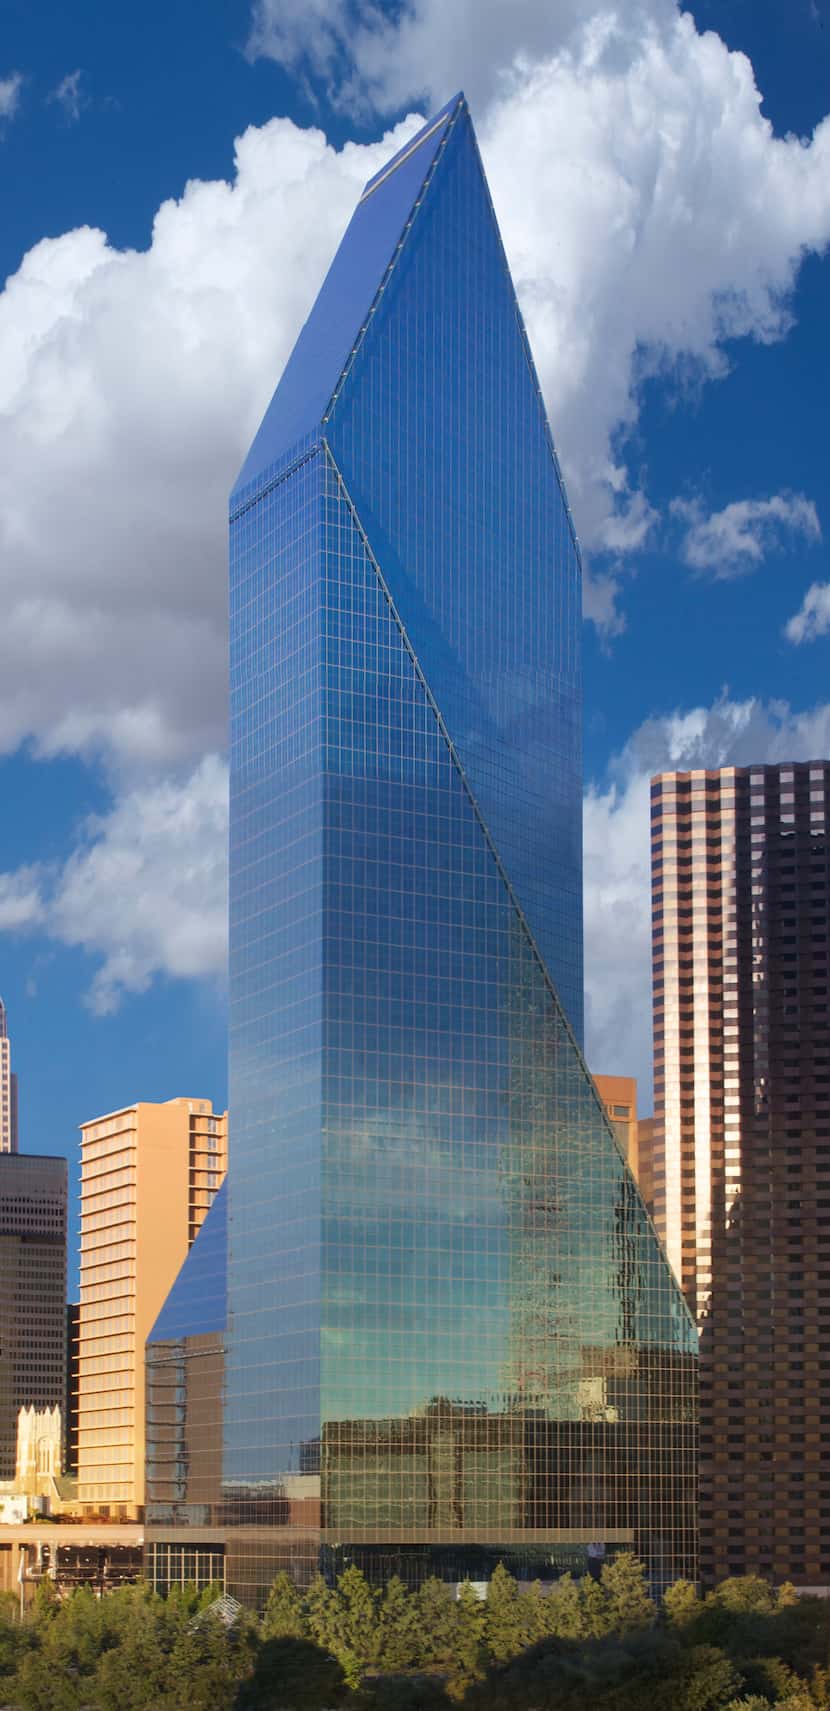 Tenet Healthcare has been located in downtown's Fountain Place tower for the last decade.